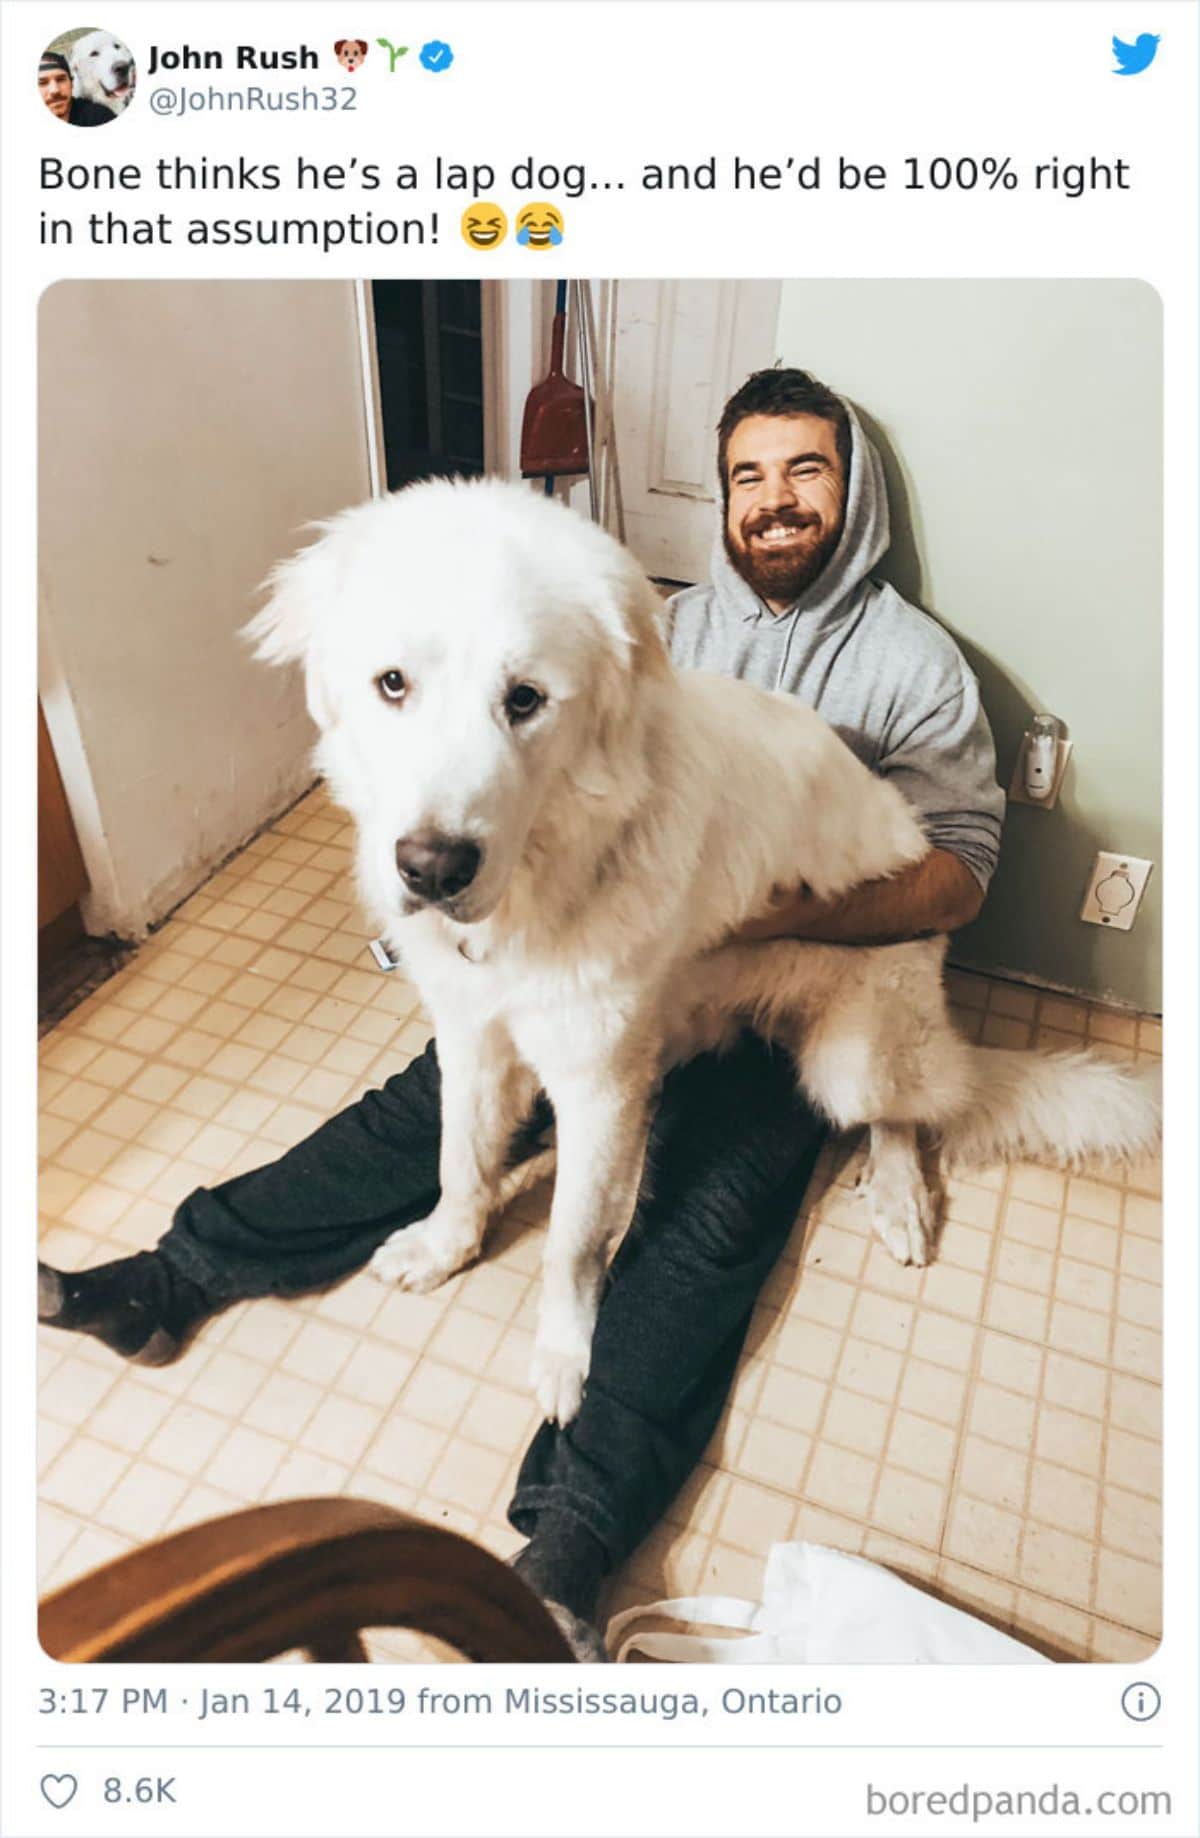 fluffy white dog sitting on a man's lap and the man is sitting on the floor